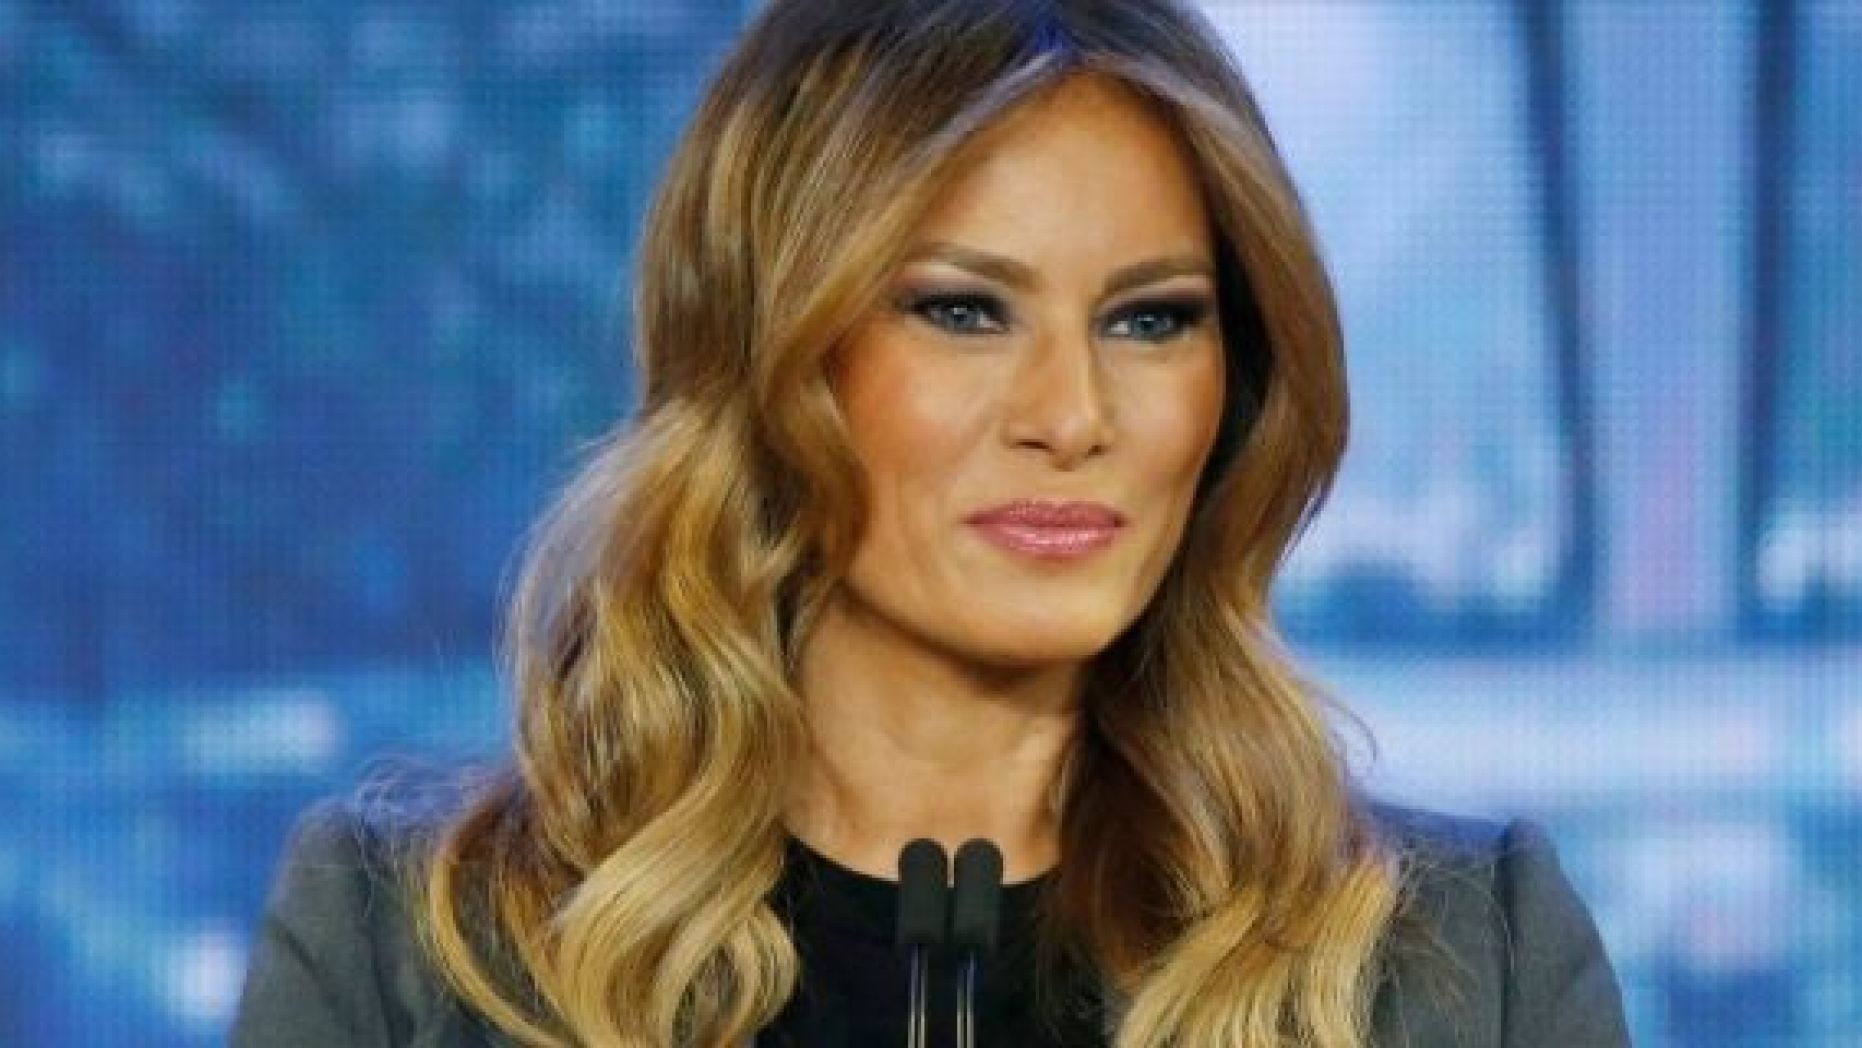 Britain’s Daily Telegraph newspaper has issued an apology Saturday after publishing an article about first lady Melania Trump it said “contained a number of false statements.”